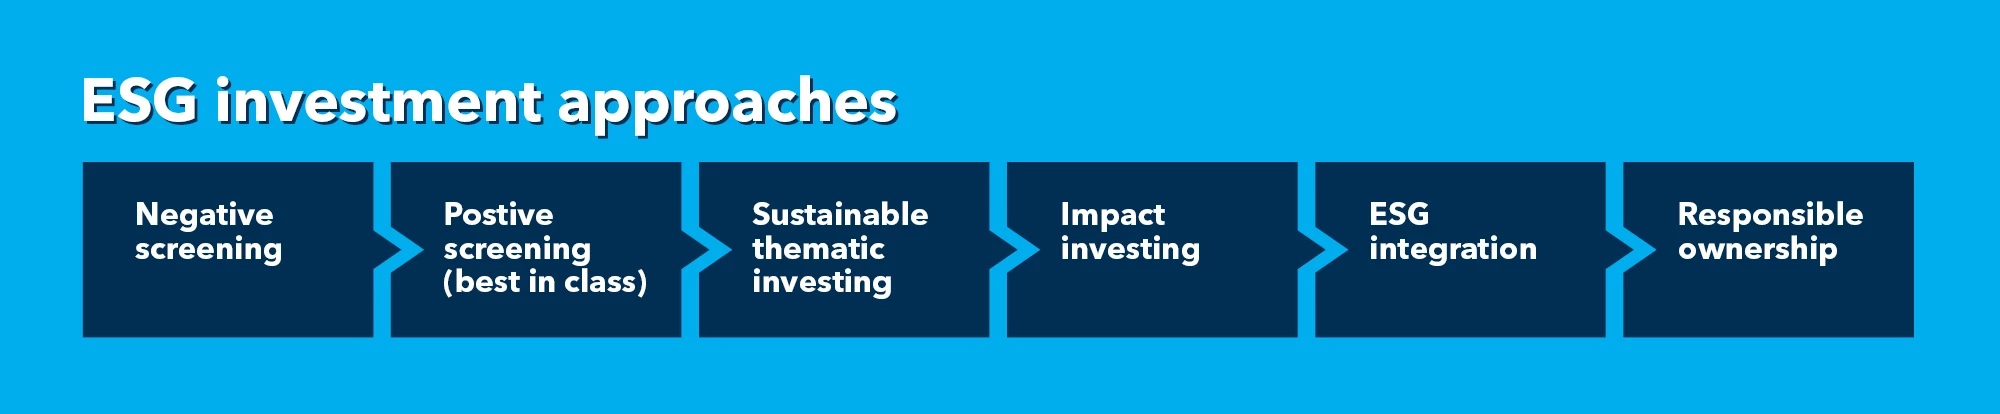 Figure 1: ESG Investment Approaches